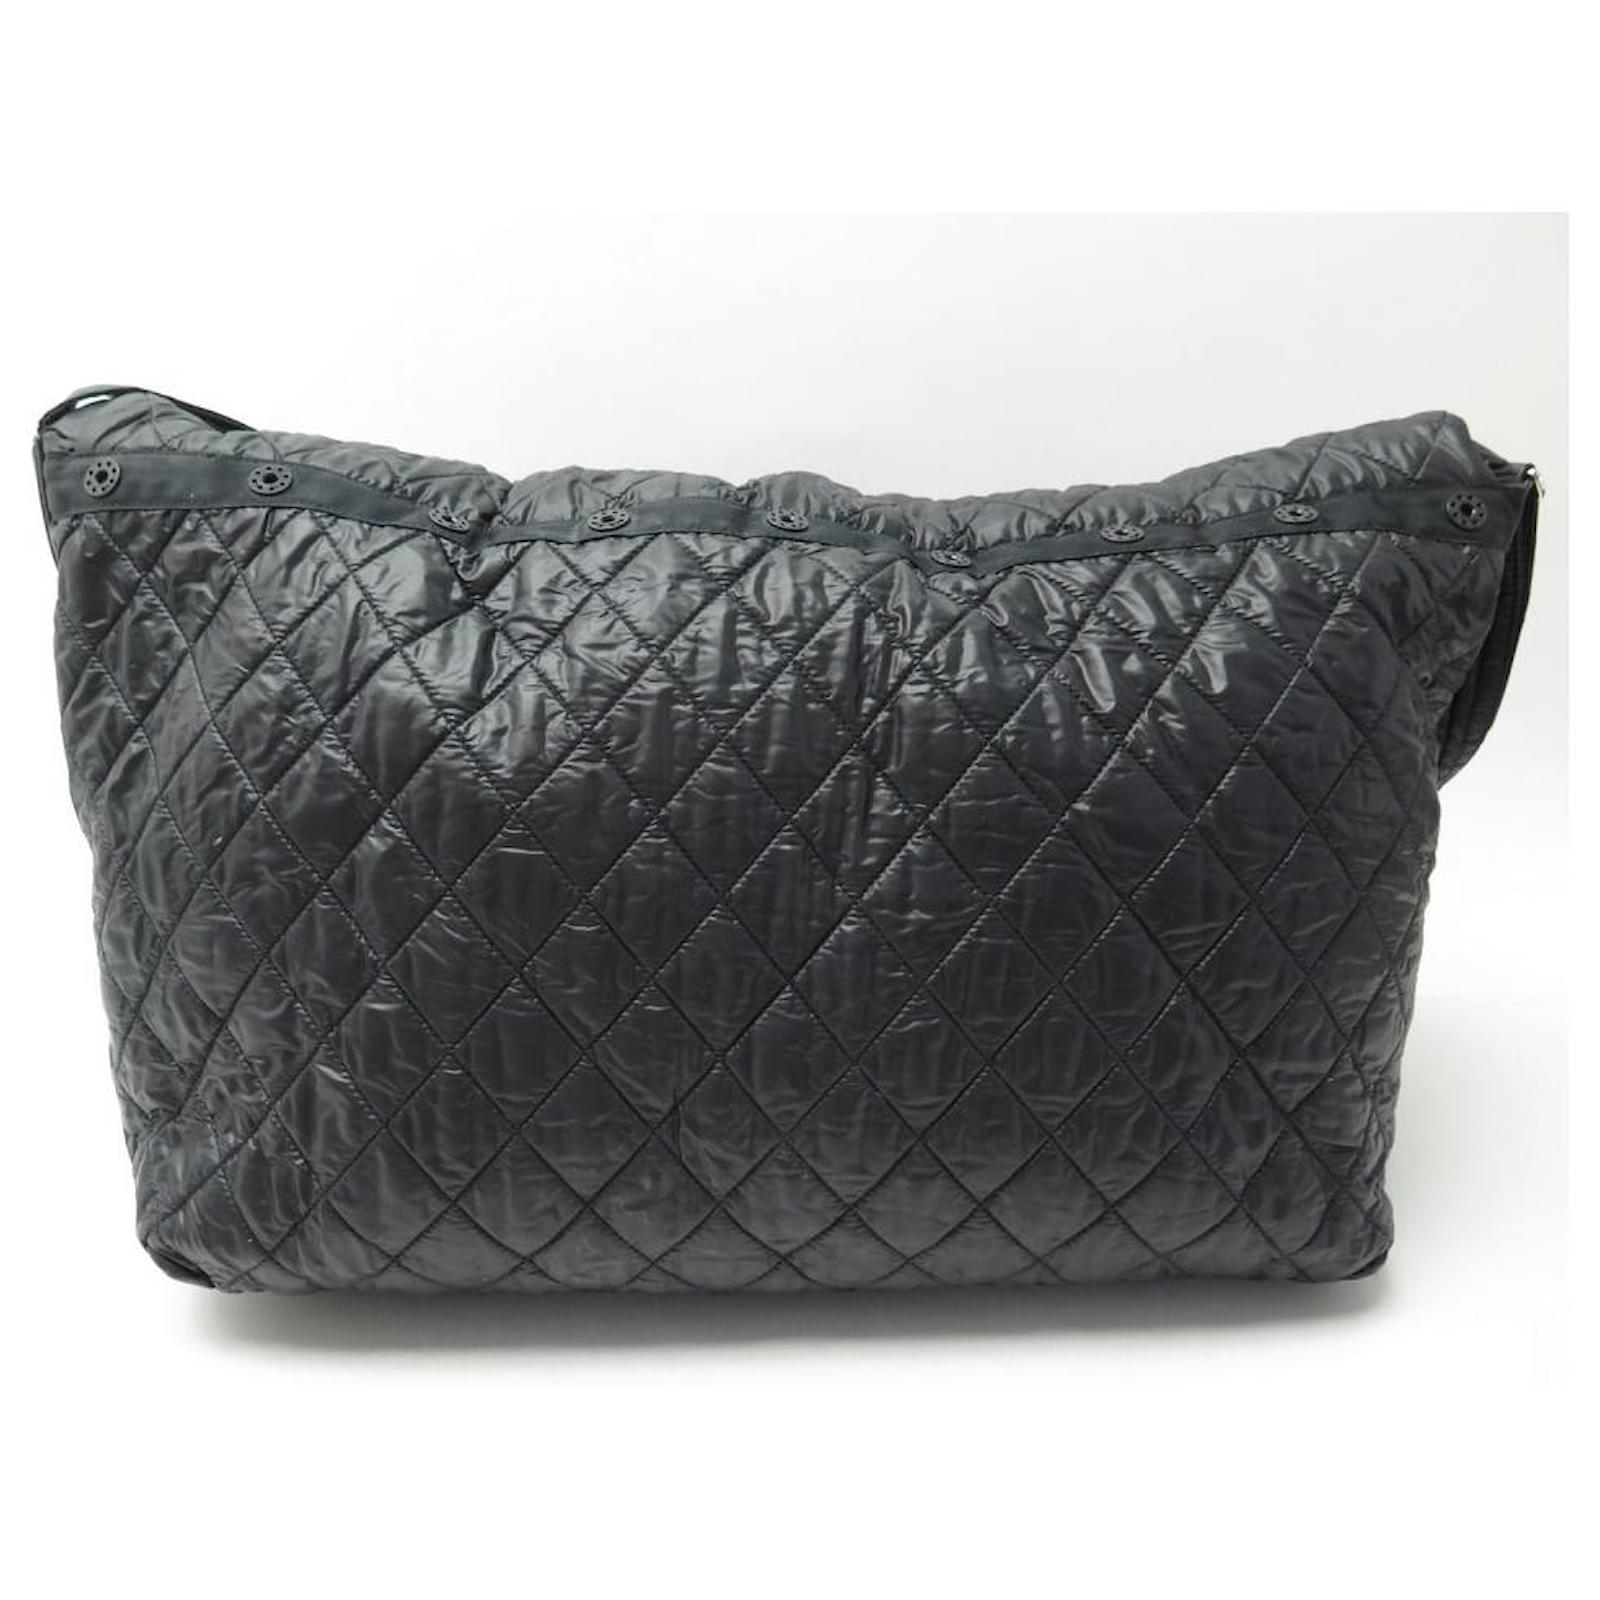 TRAVEL HANDBAGS CHANEL COCO COCOON XL QUILTED CANVAS BANDOULIERE BAG